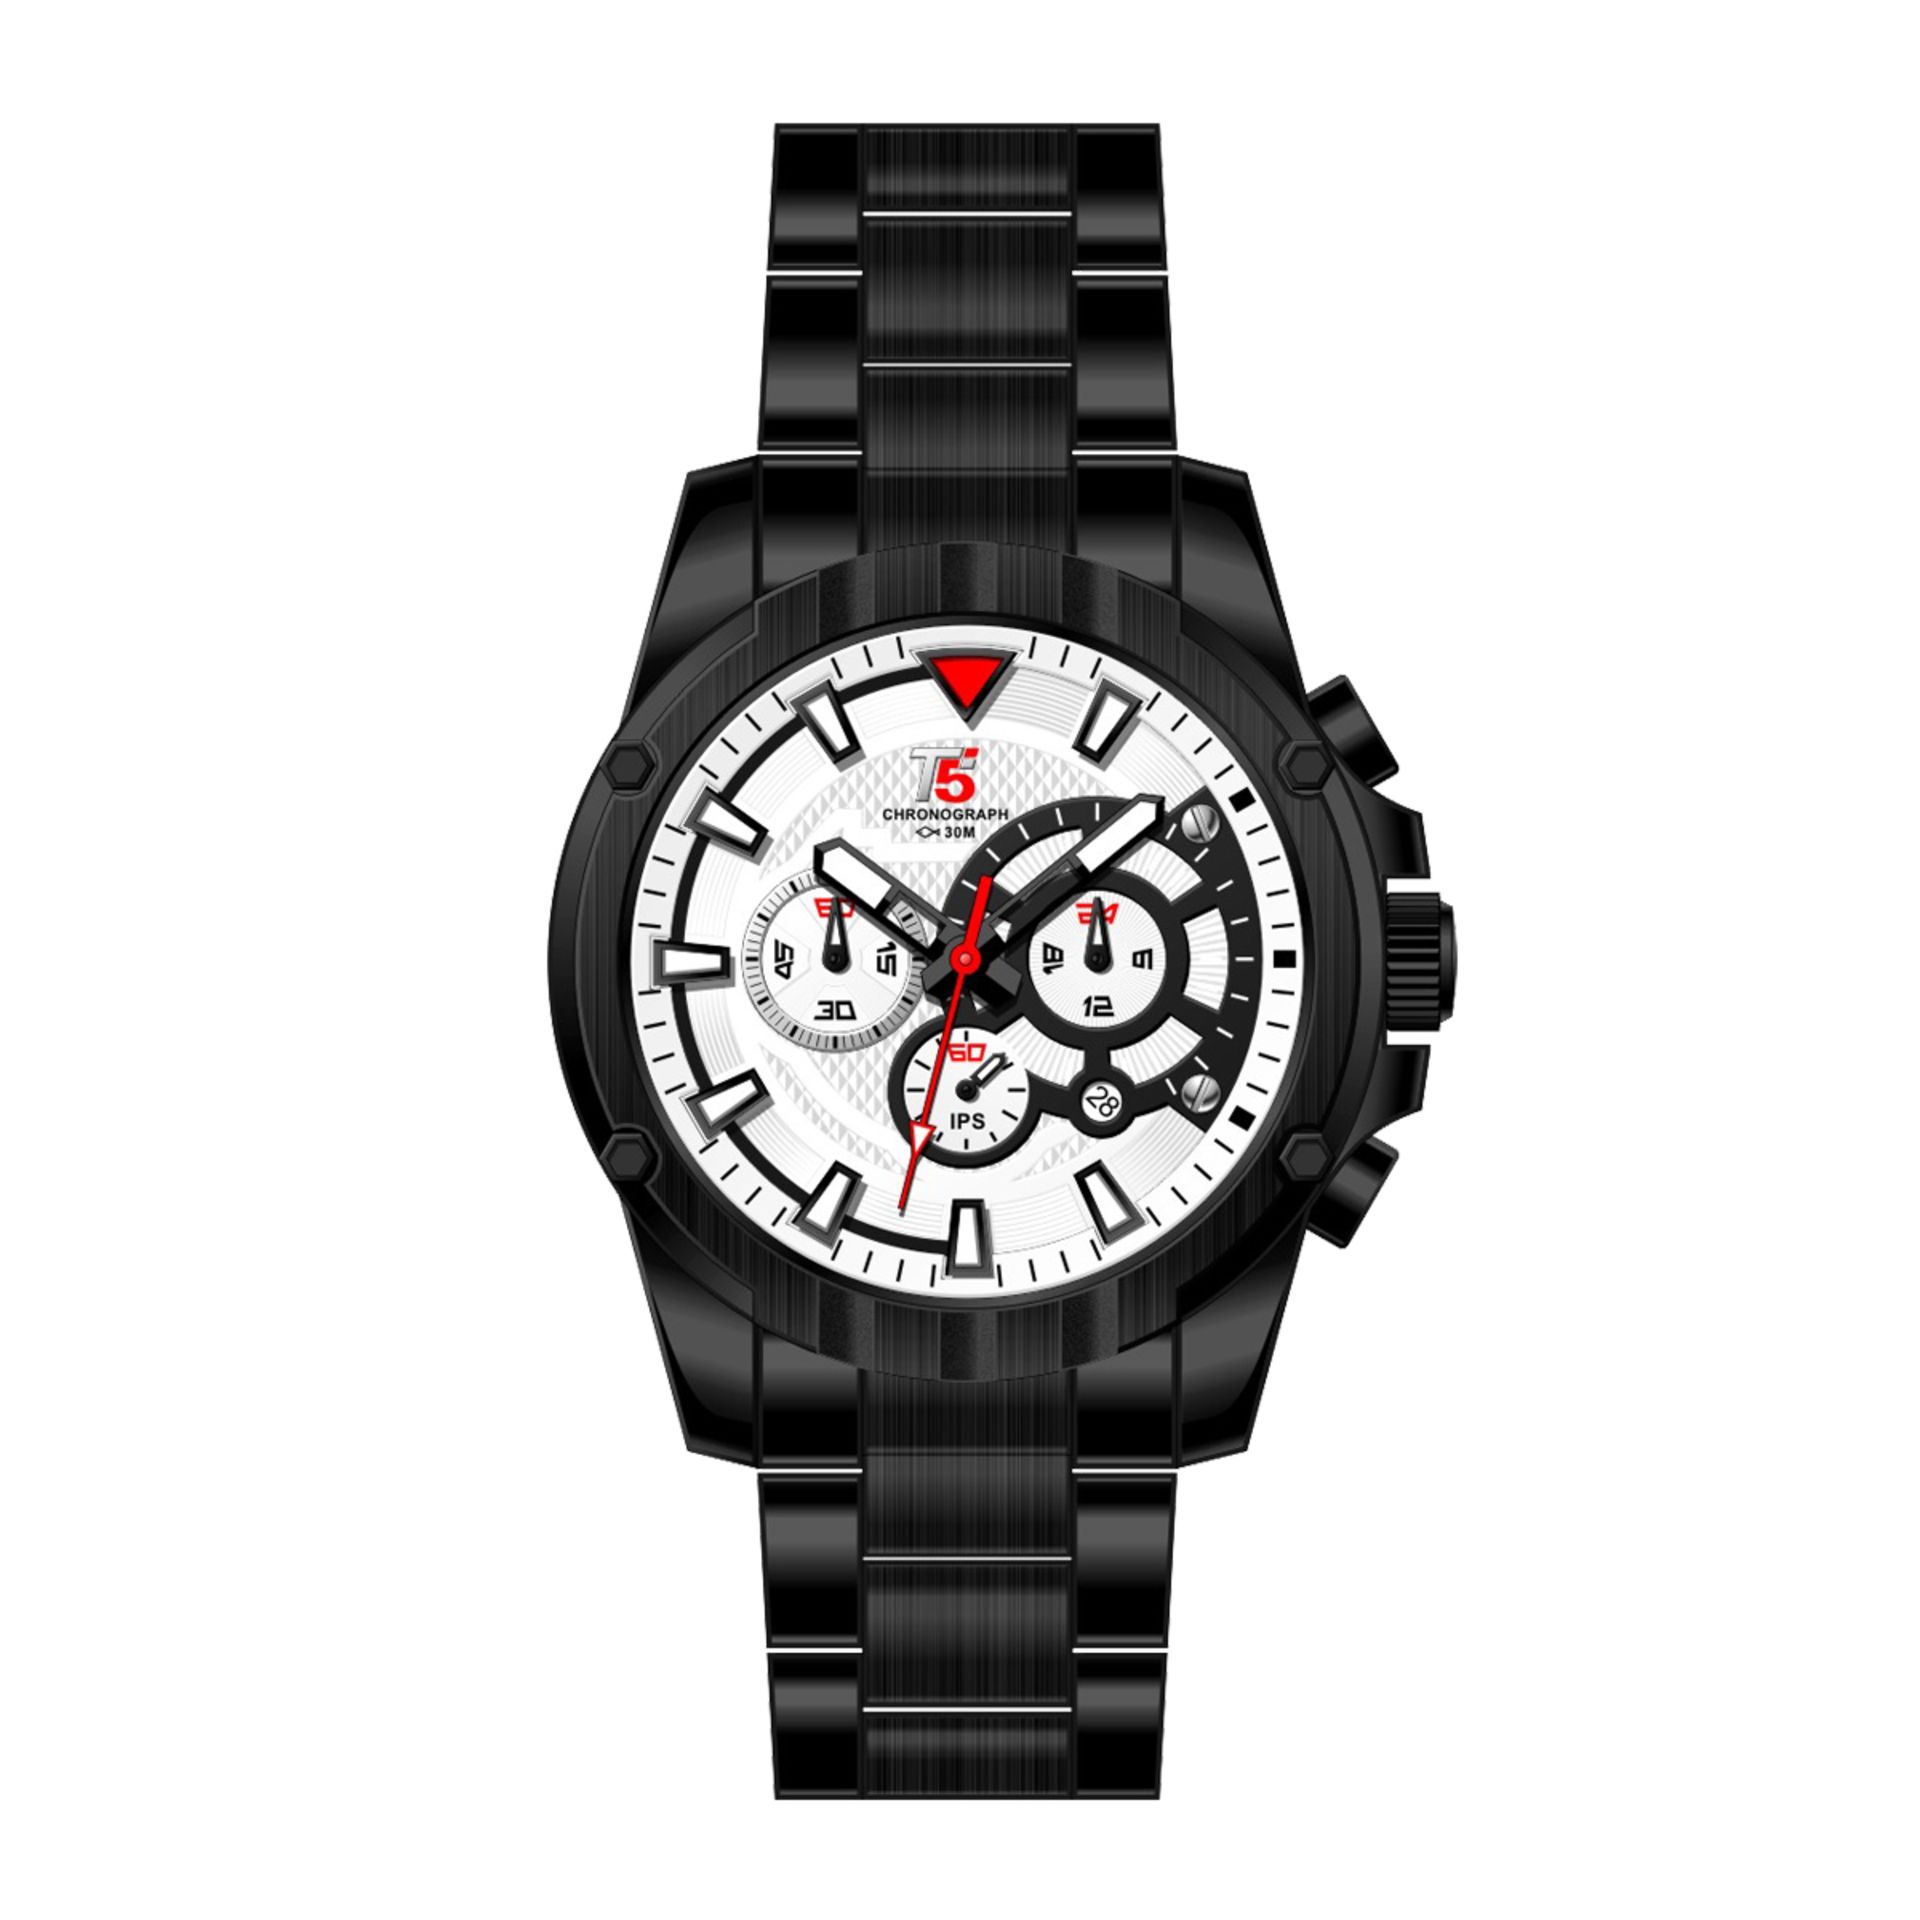 T5 Dexter D2 watch has a white chronograph dial with black hands and white markers. Date Function.